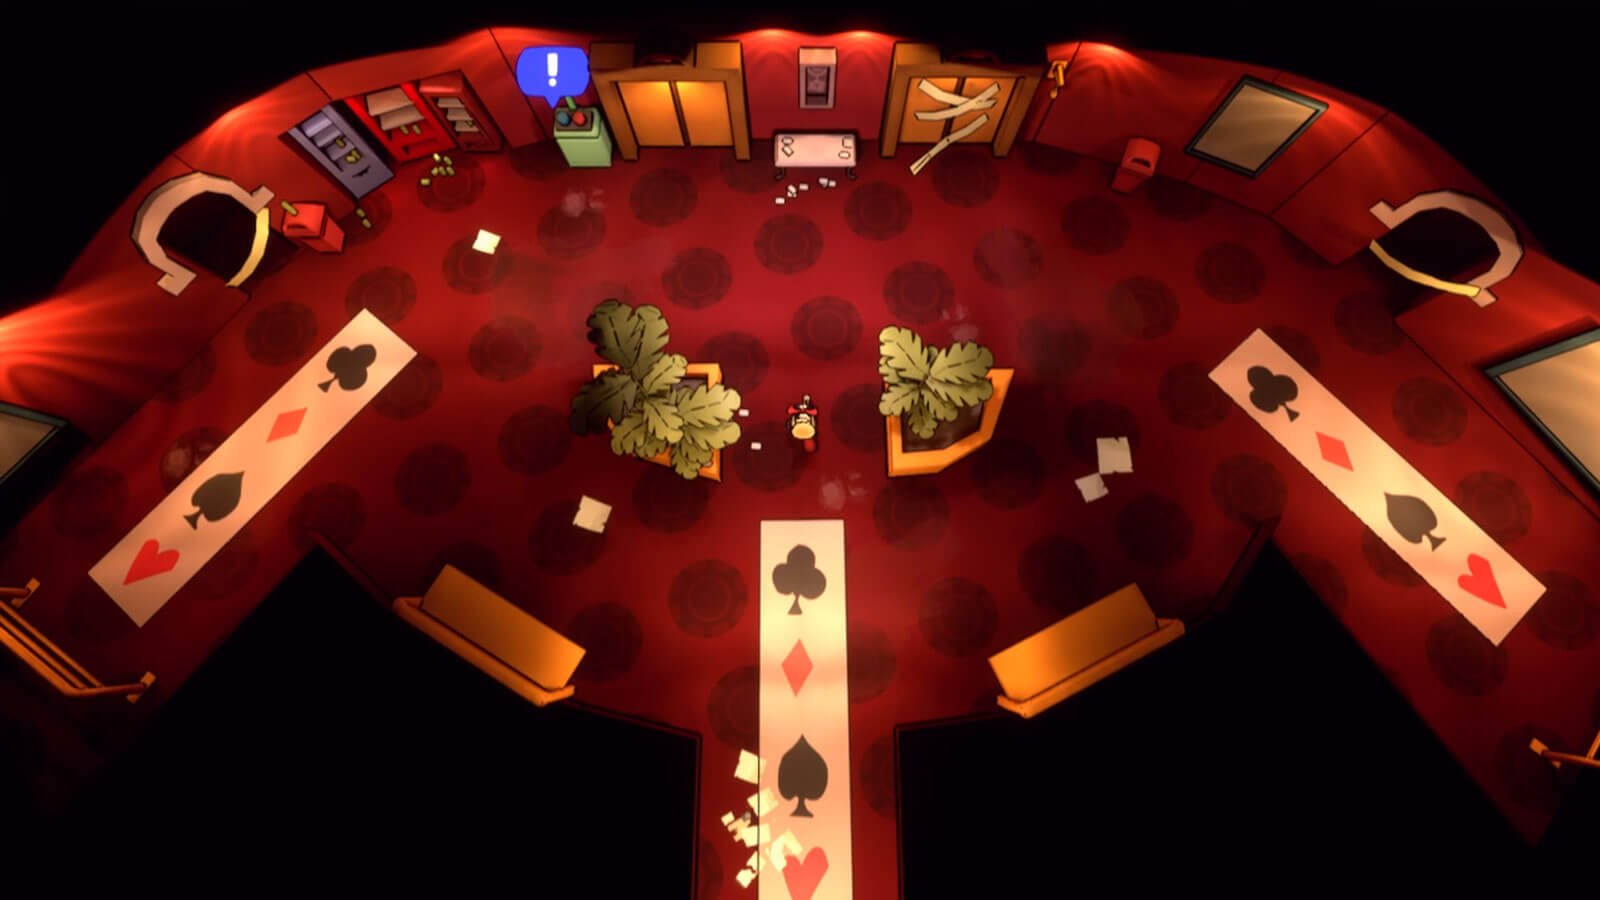 Top-down view of player entering a hotel with playing card symbol designs on the floor